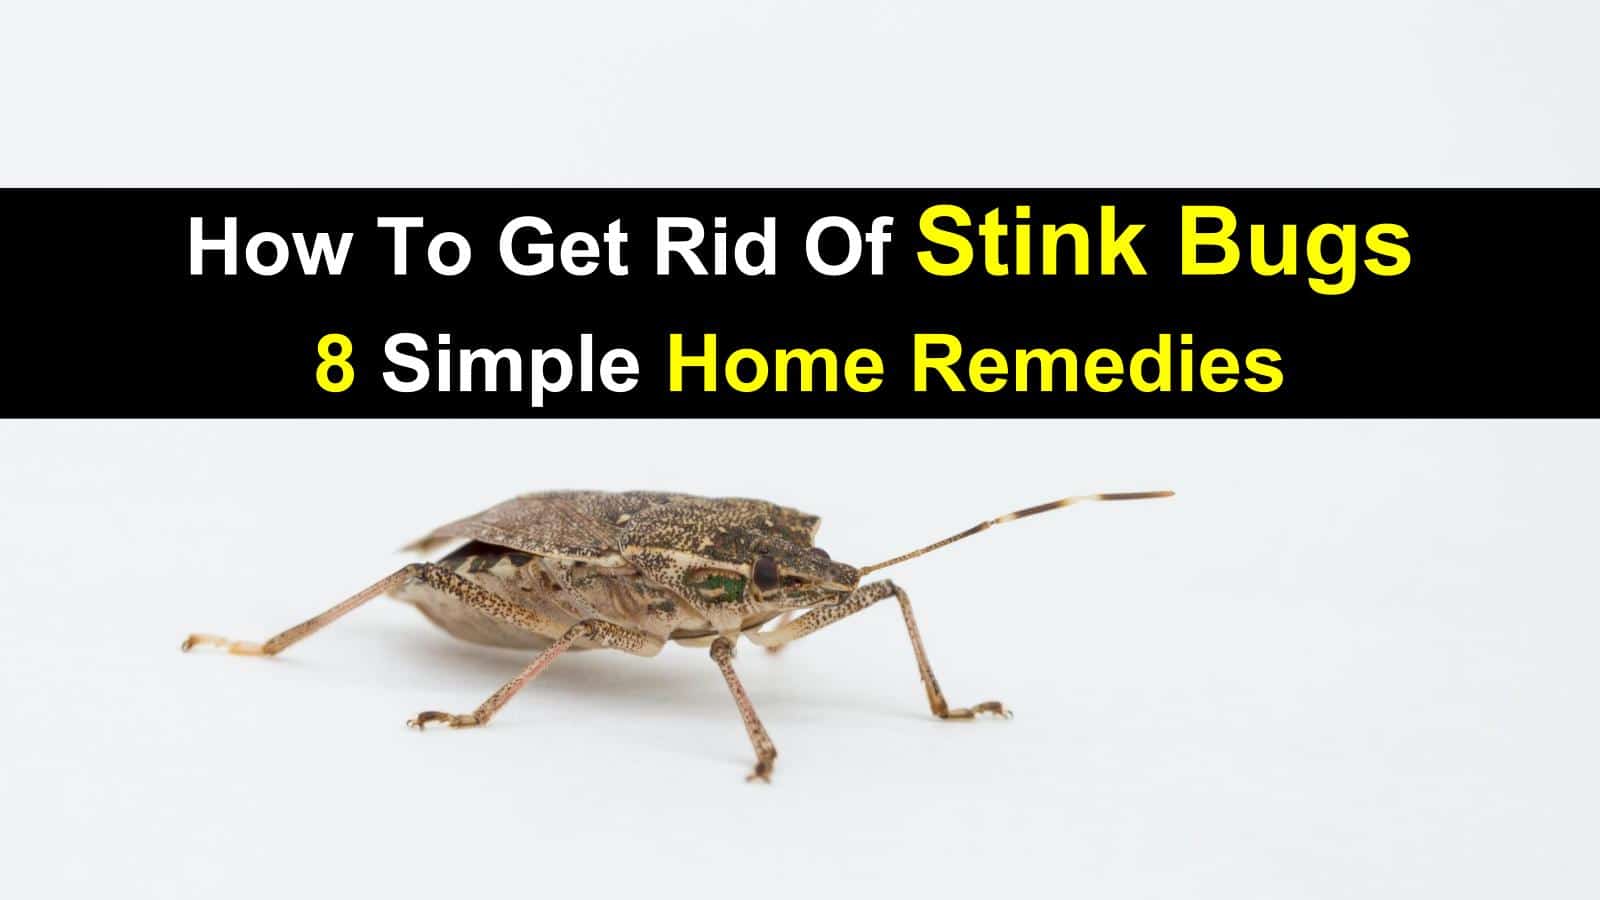 How to get rid of stink bugs and 8 simple home remedies img